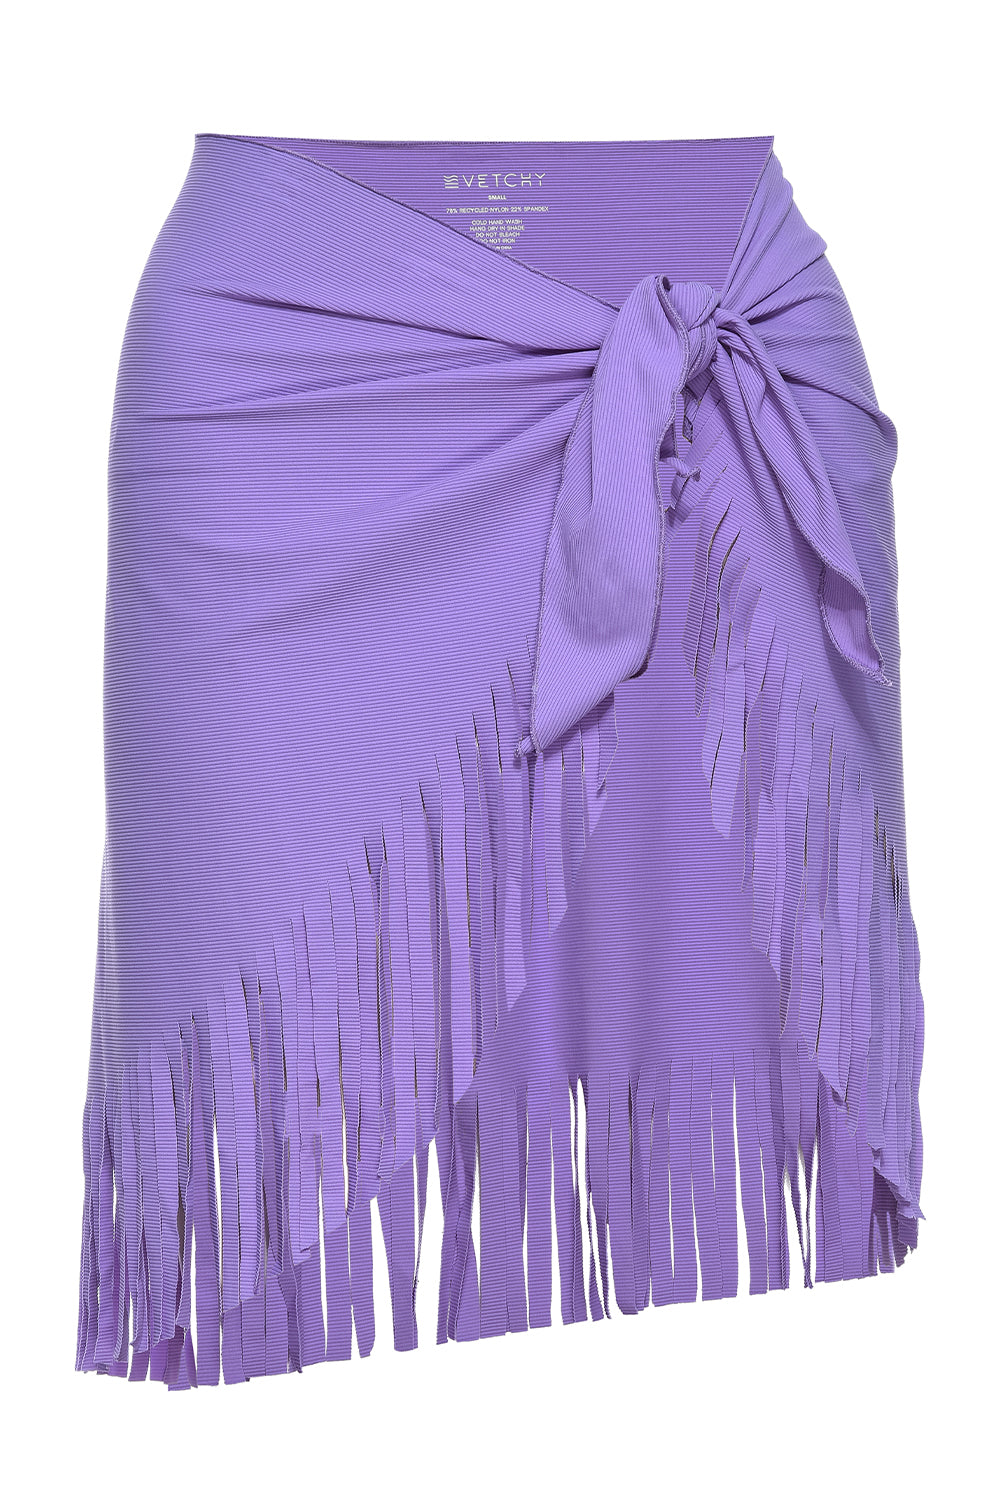 Lilac Sarong on white background front view.